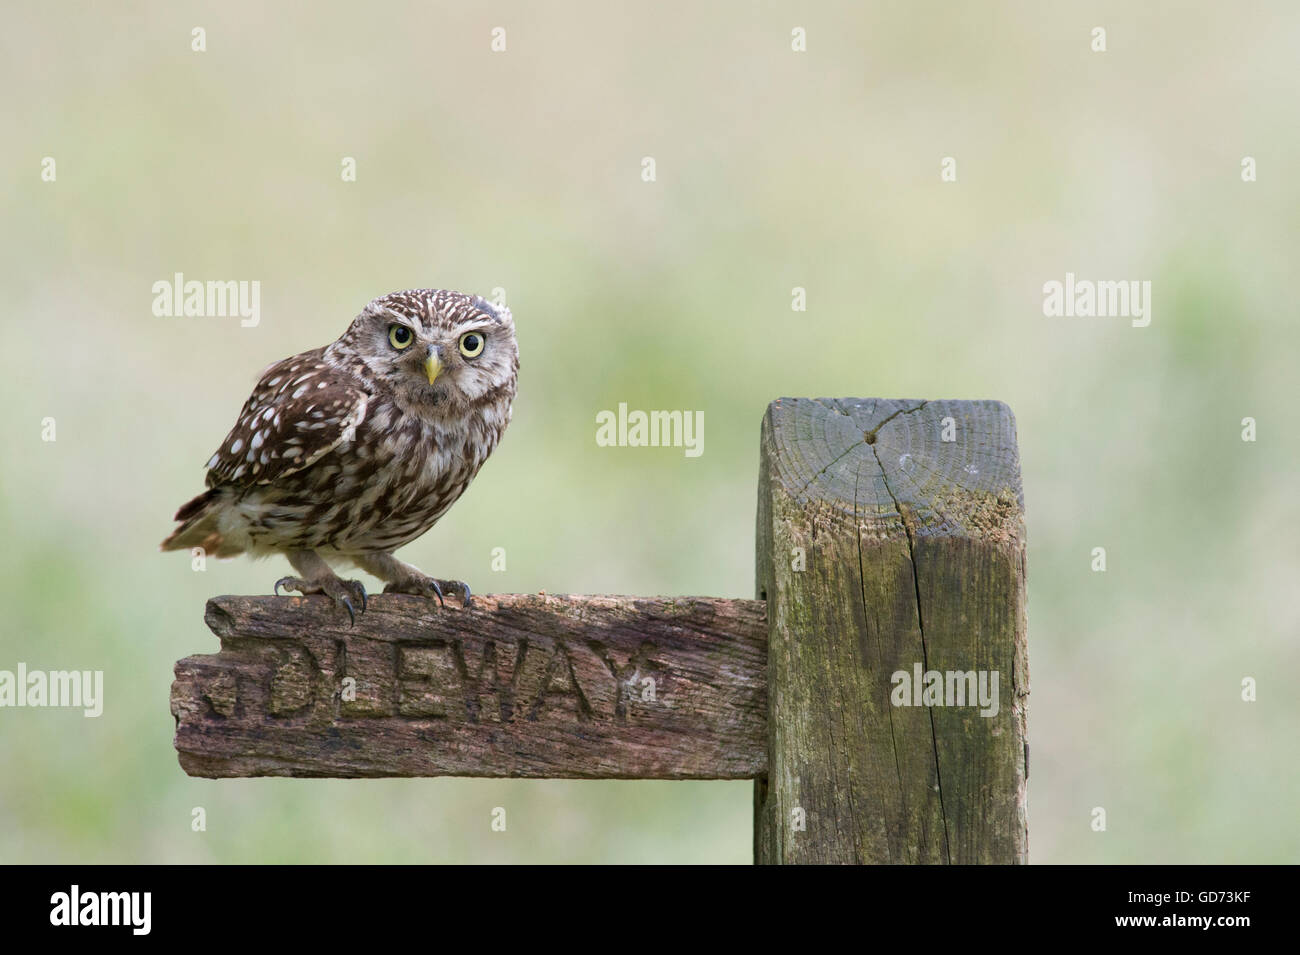 A Little Owl (Athene noctua) perched on an old public bridleway sign in farmland in the Yorkshire countryside. Stock Photo